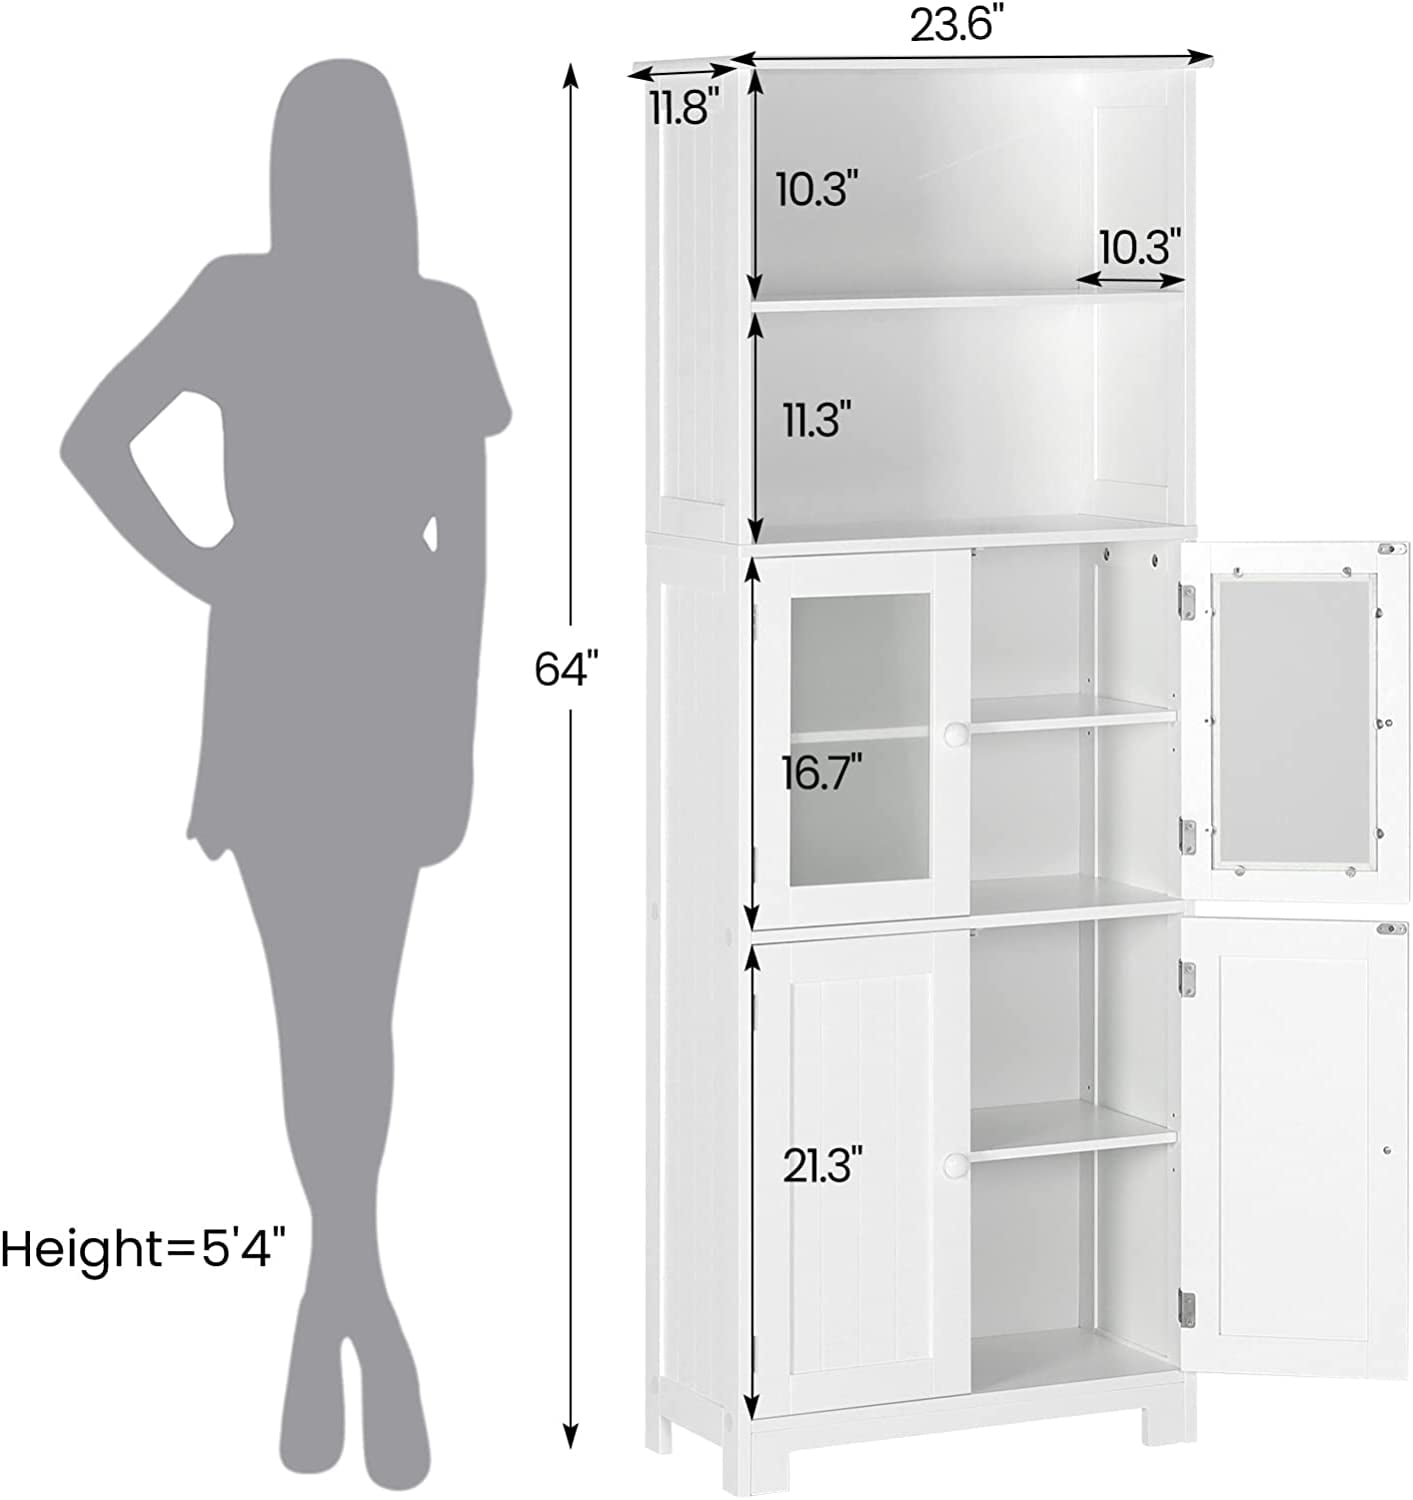  Tiptiper Tall Large Floor Storage Cabinet with Open  Compartments and 2 Cabinets with Doors, 64” Height Freestanding Linen Tower  Cabinet, for Home Kitchen, Bathroom, Living Room, White : Home & Kitchen